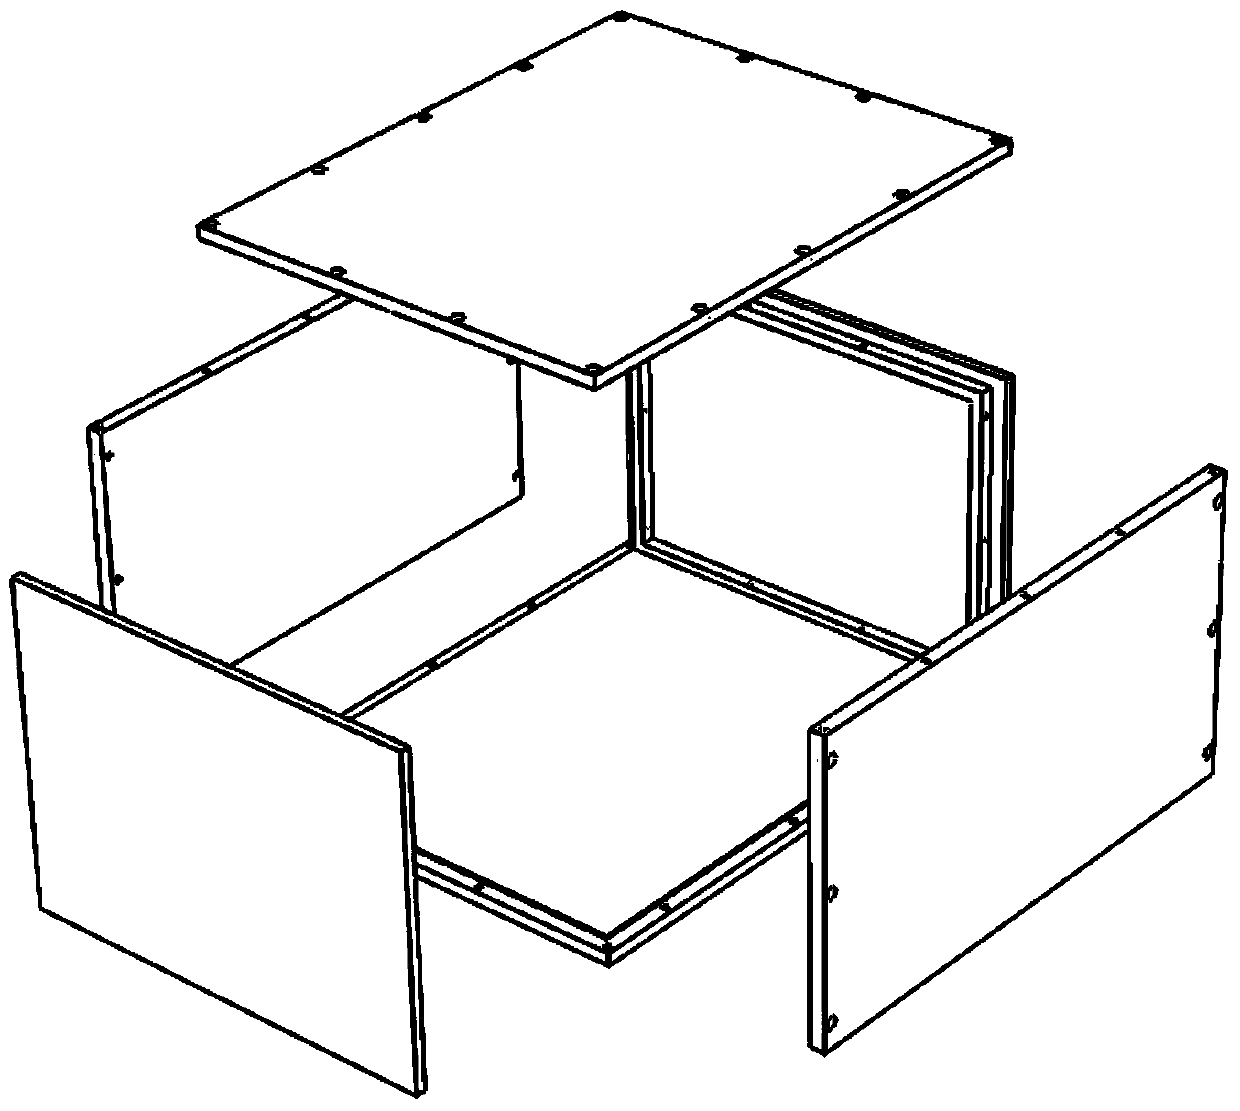 Corner supporting thin-wall shell structure